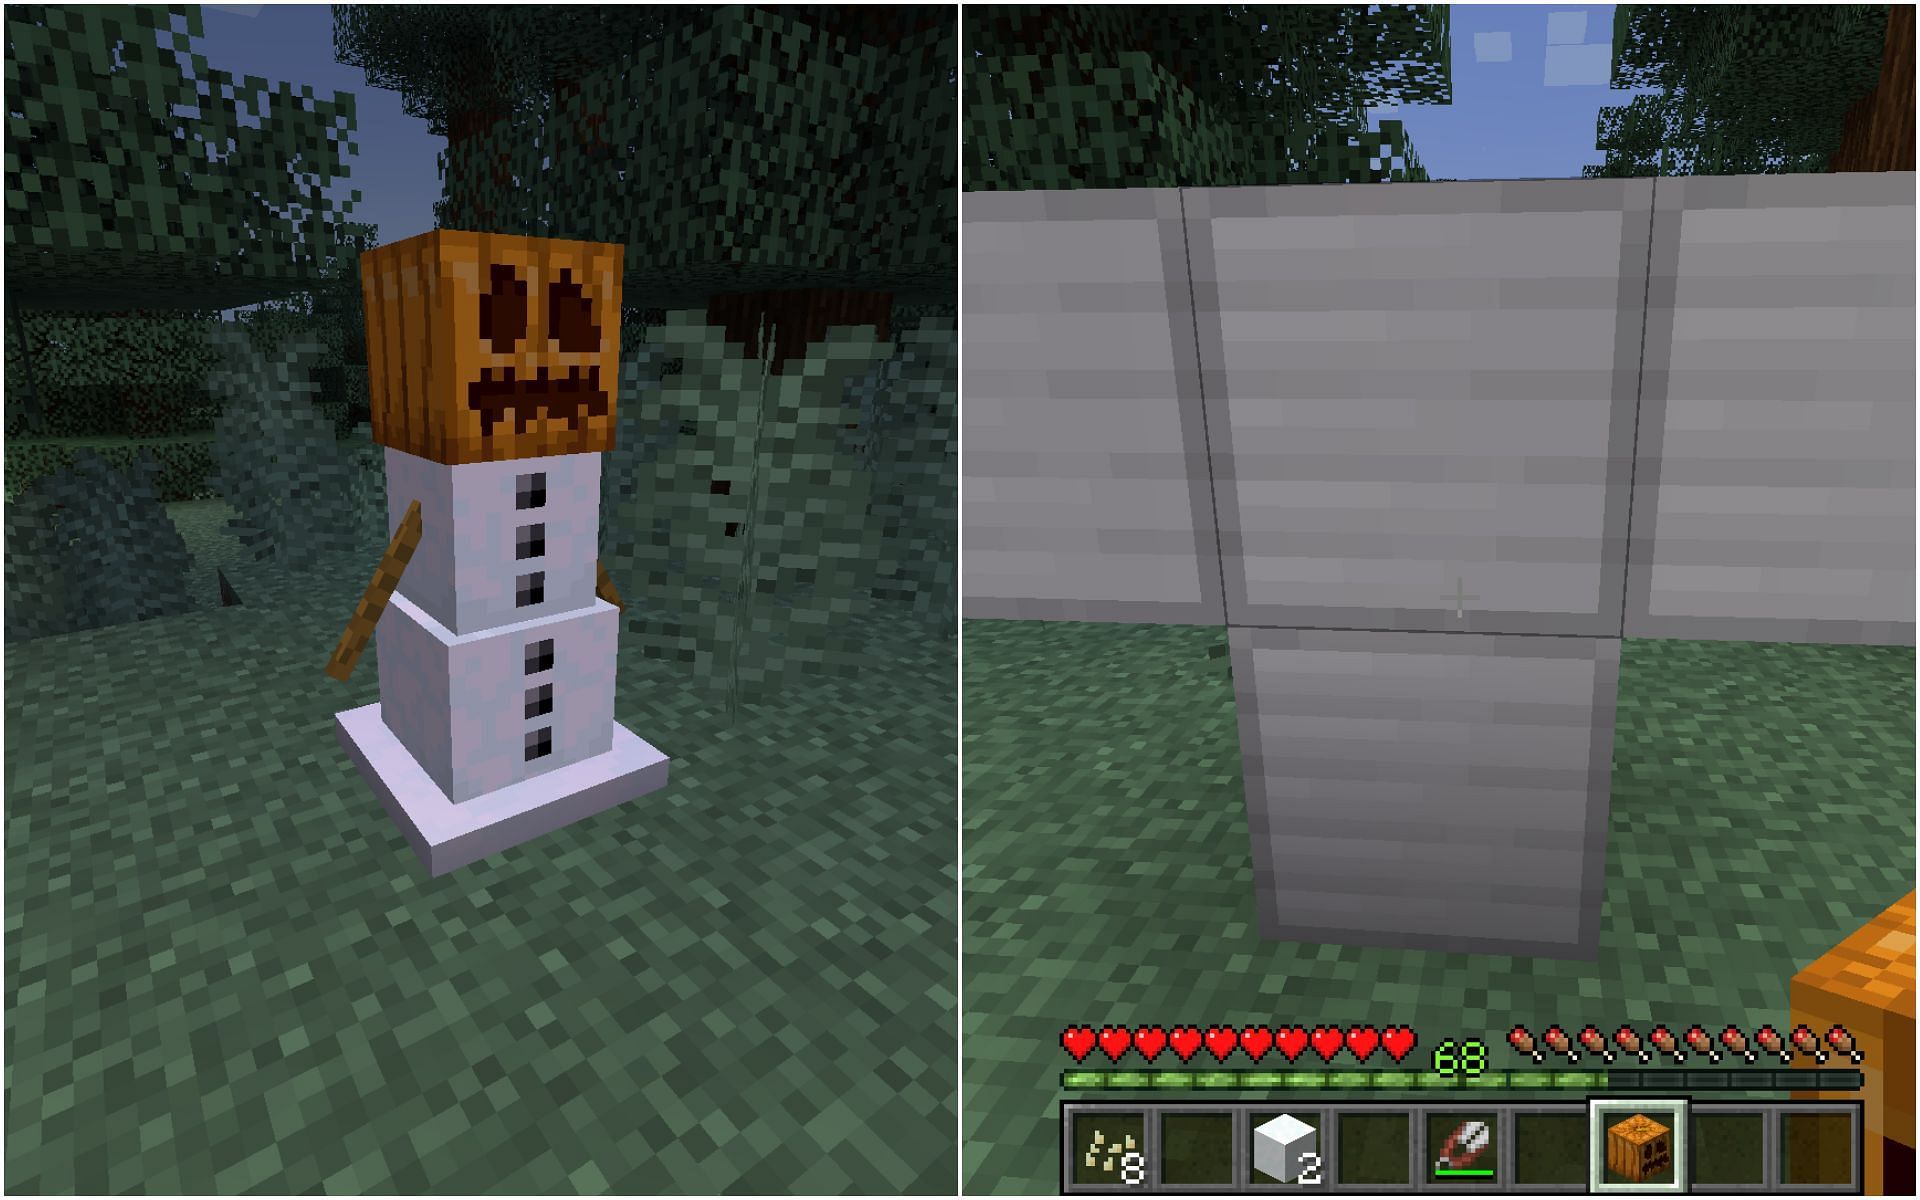 Create snow and iron golem with carved pumpkins (Image via Minecraft 1.19 update)